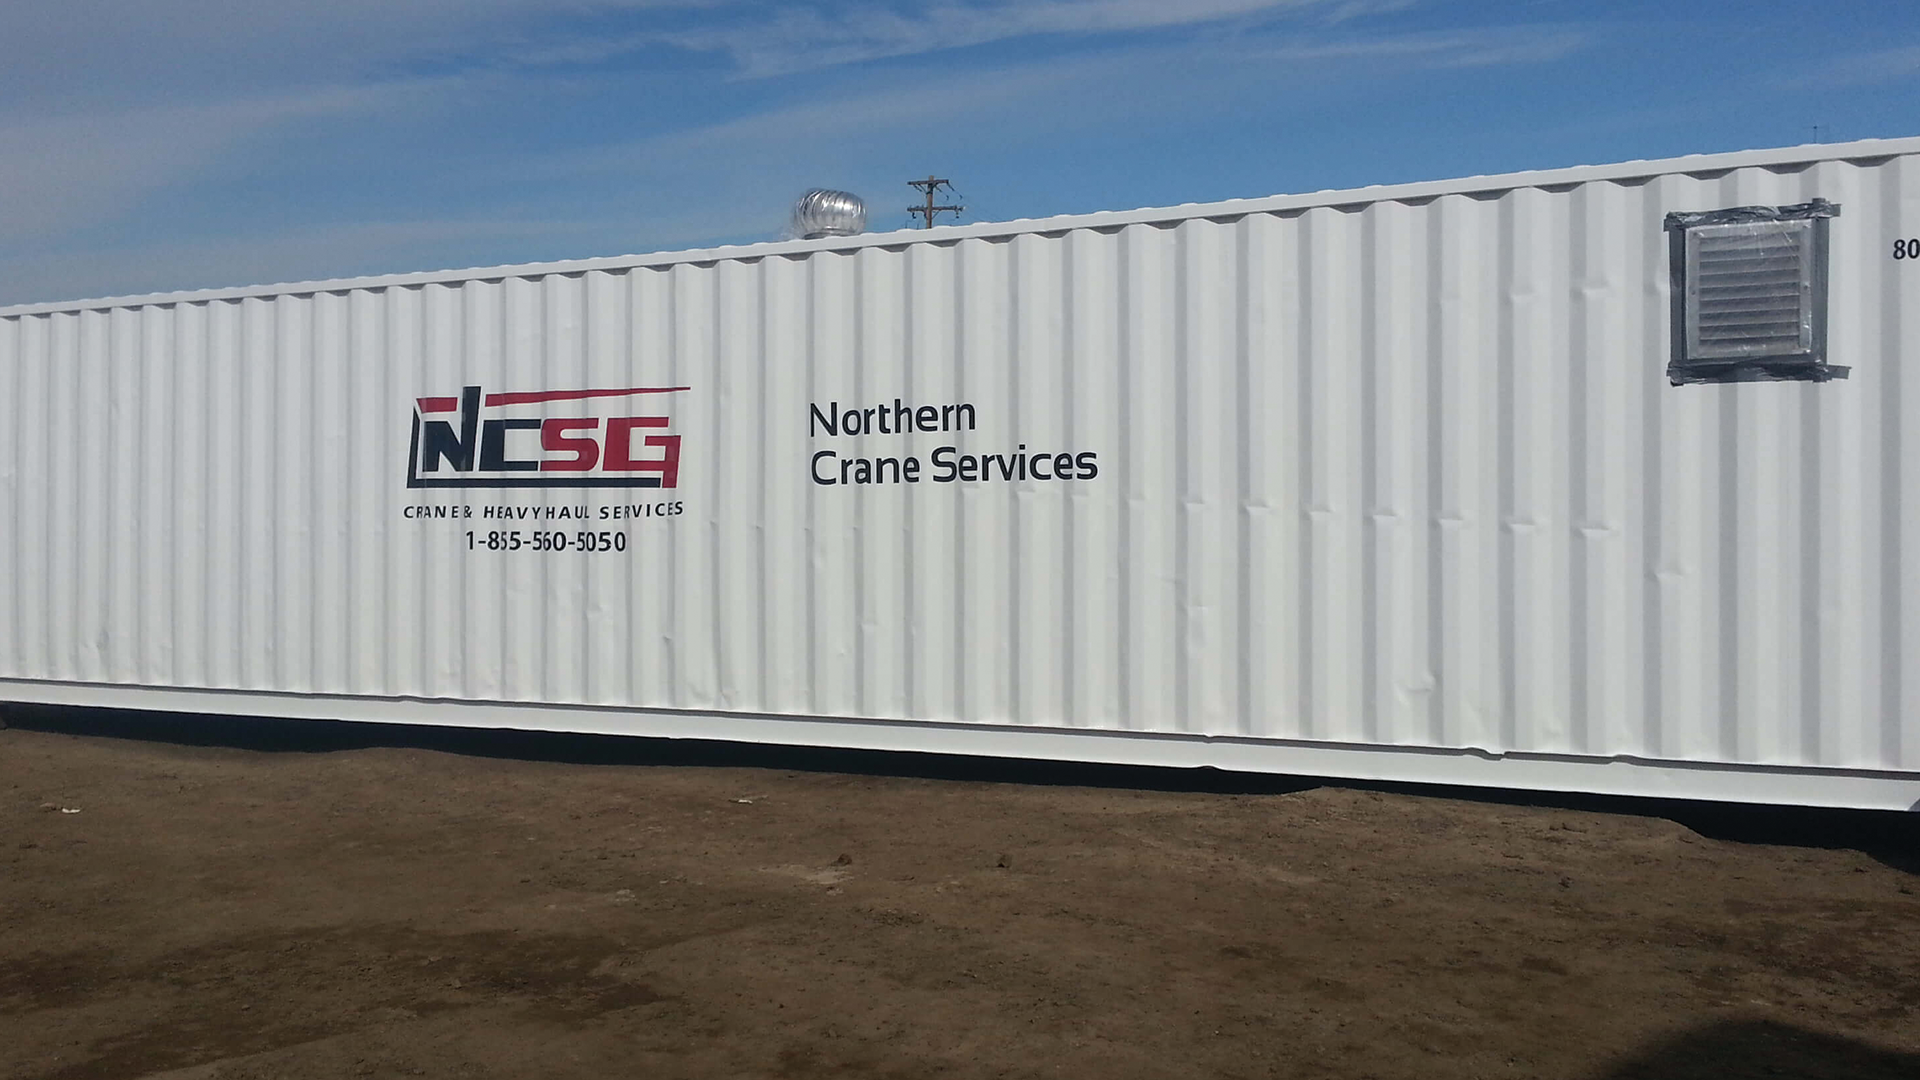 Northern Crane Services container